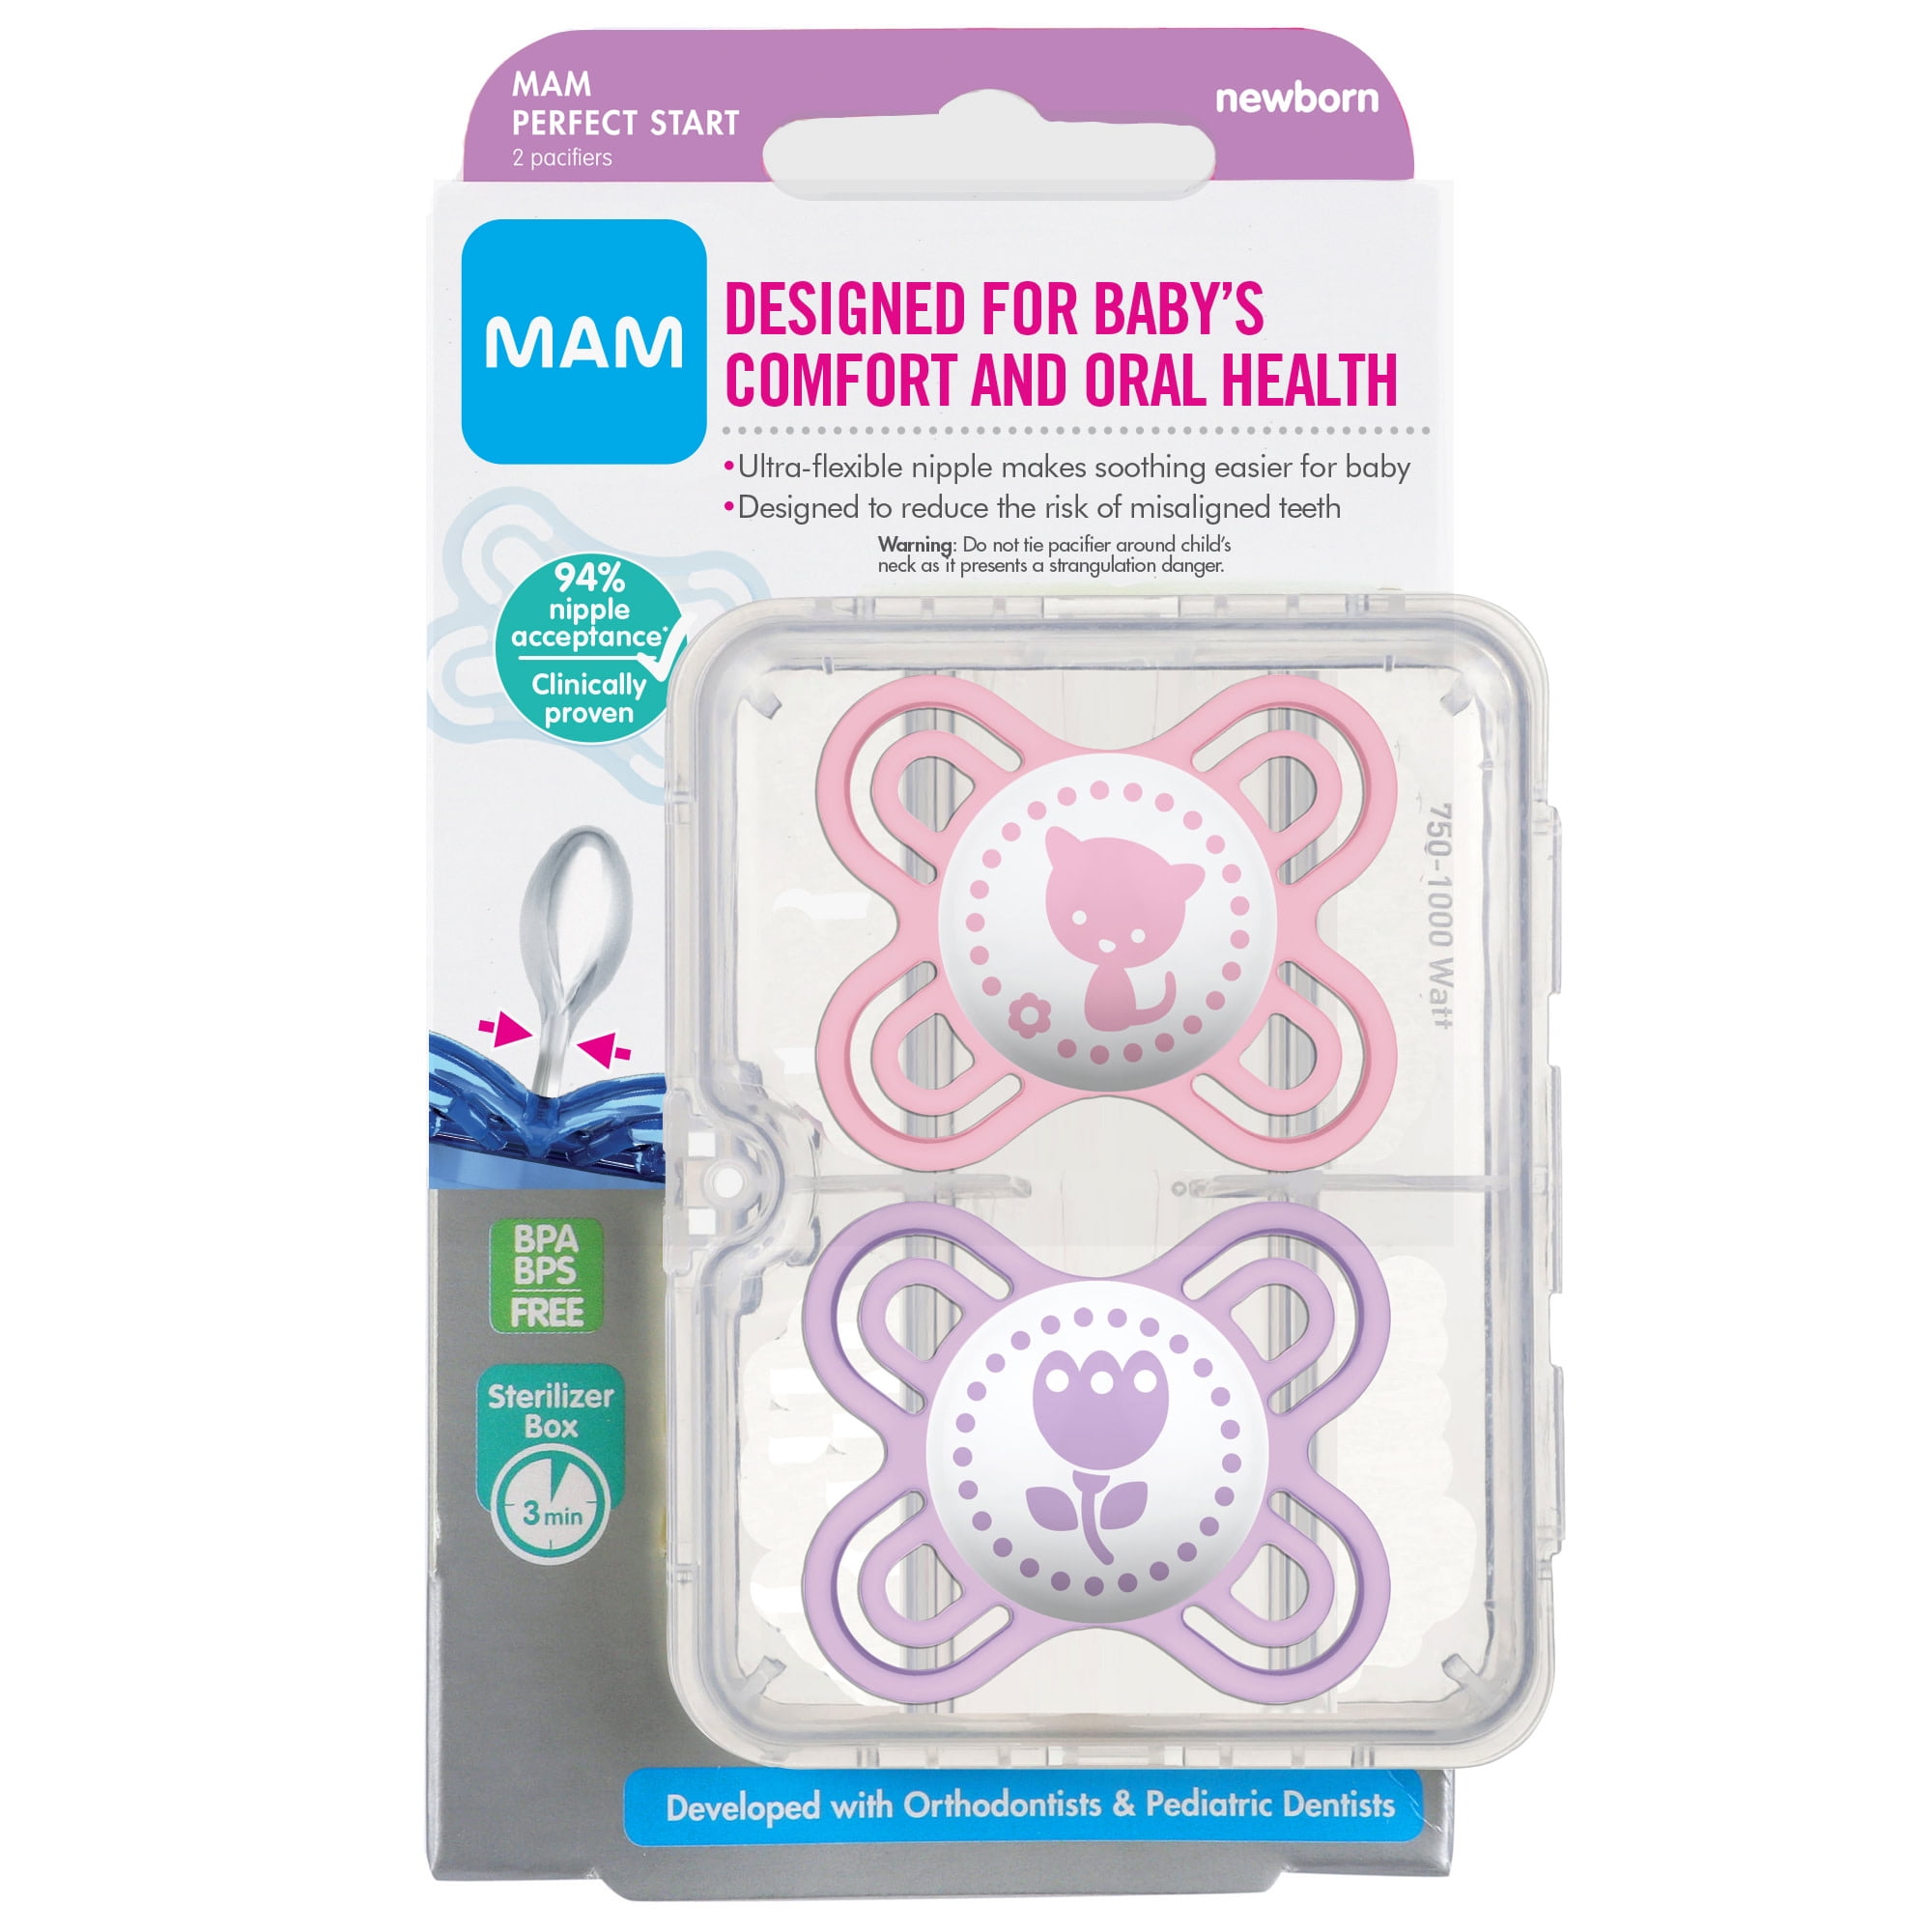 MAM Perfect Pacifier – supports healthy dental development